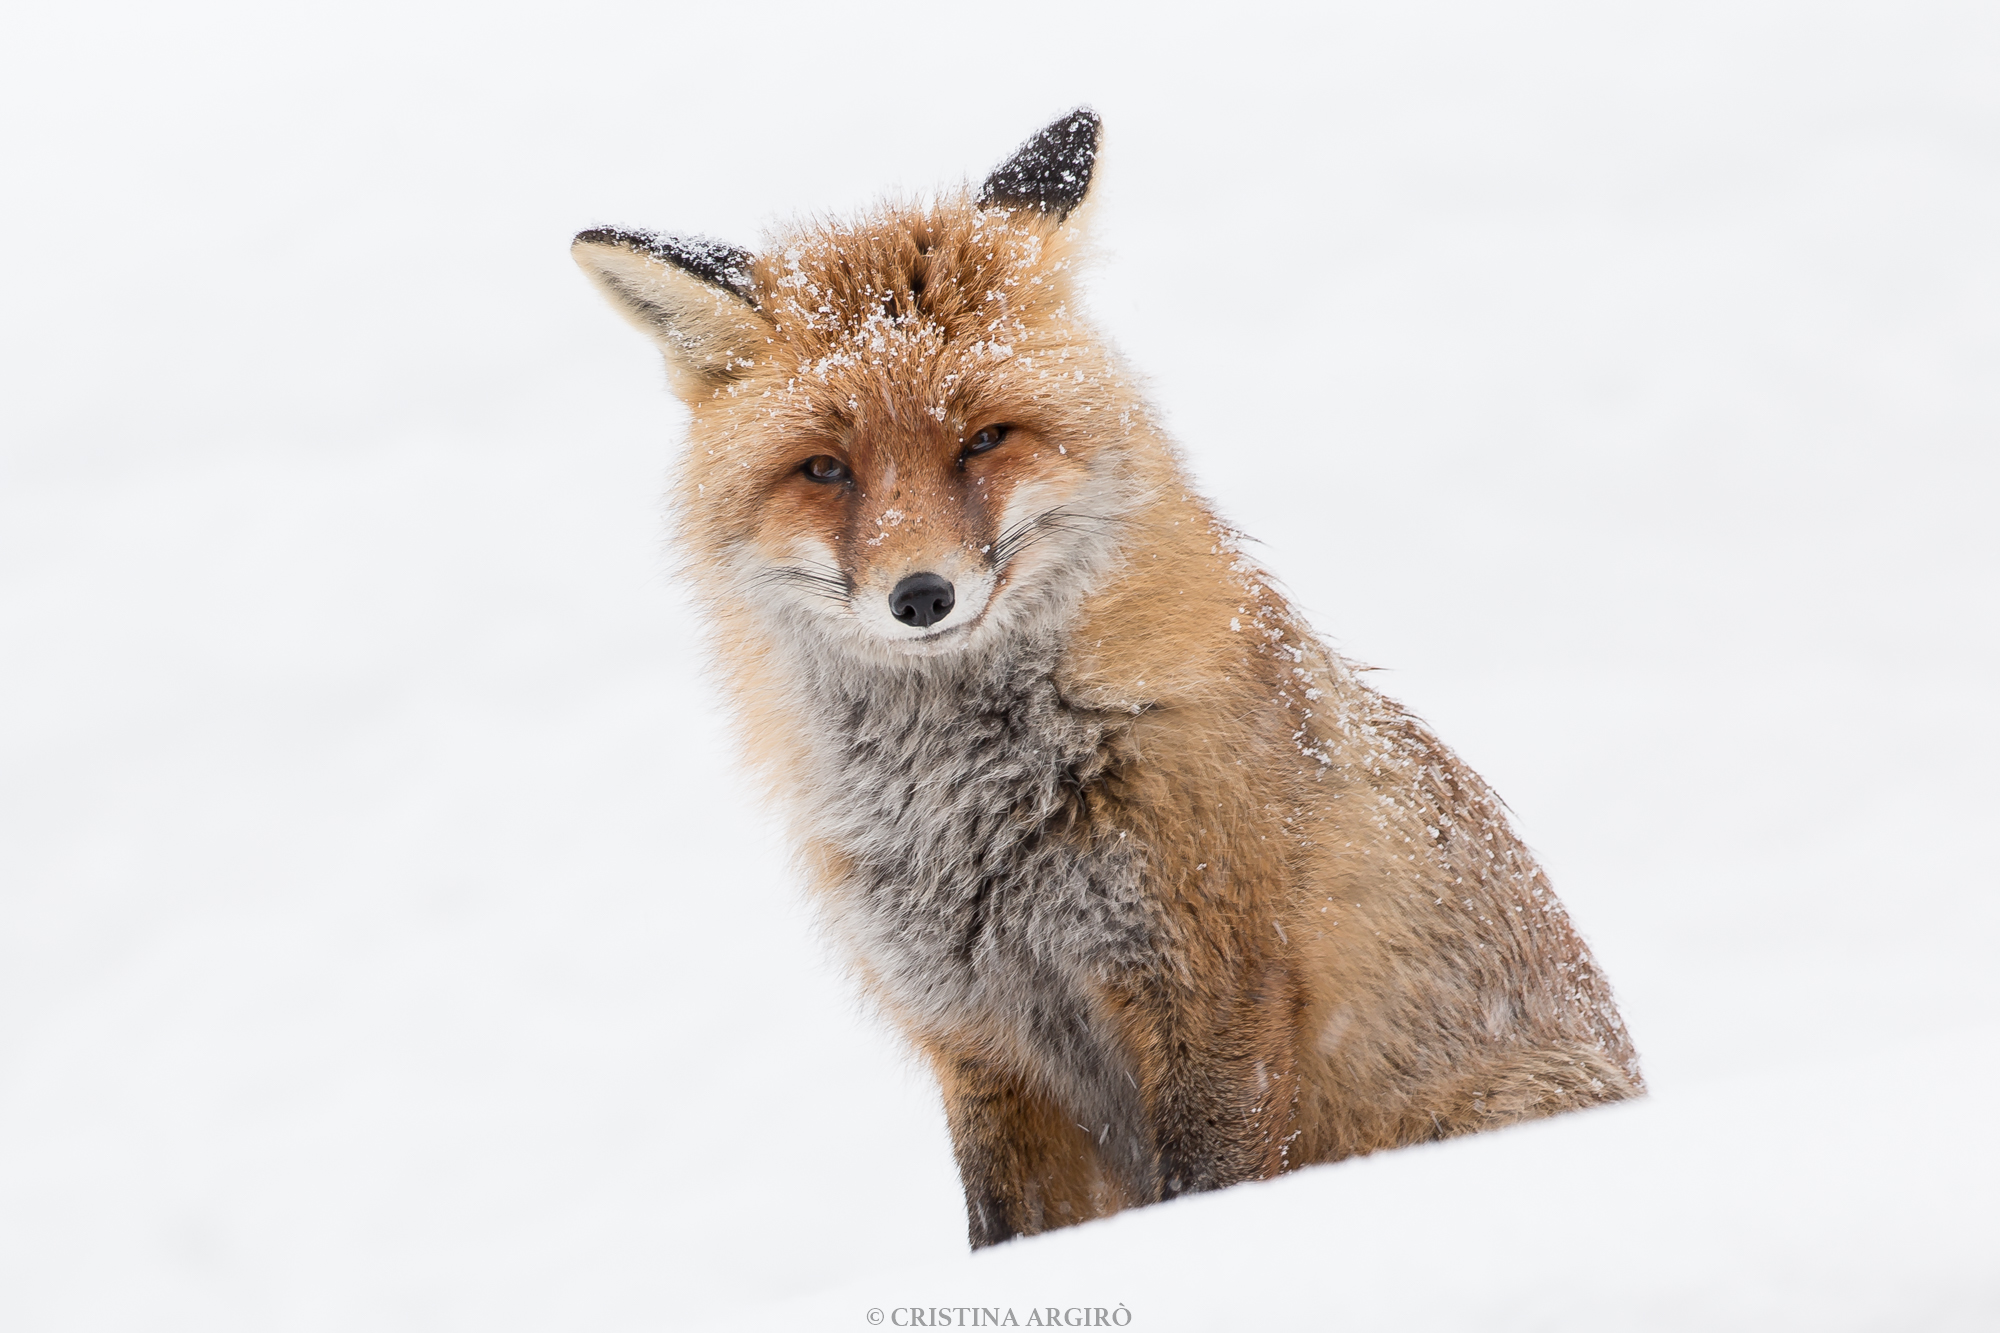 The look of the red fox...